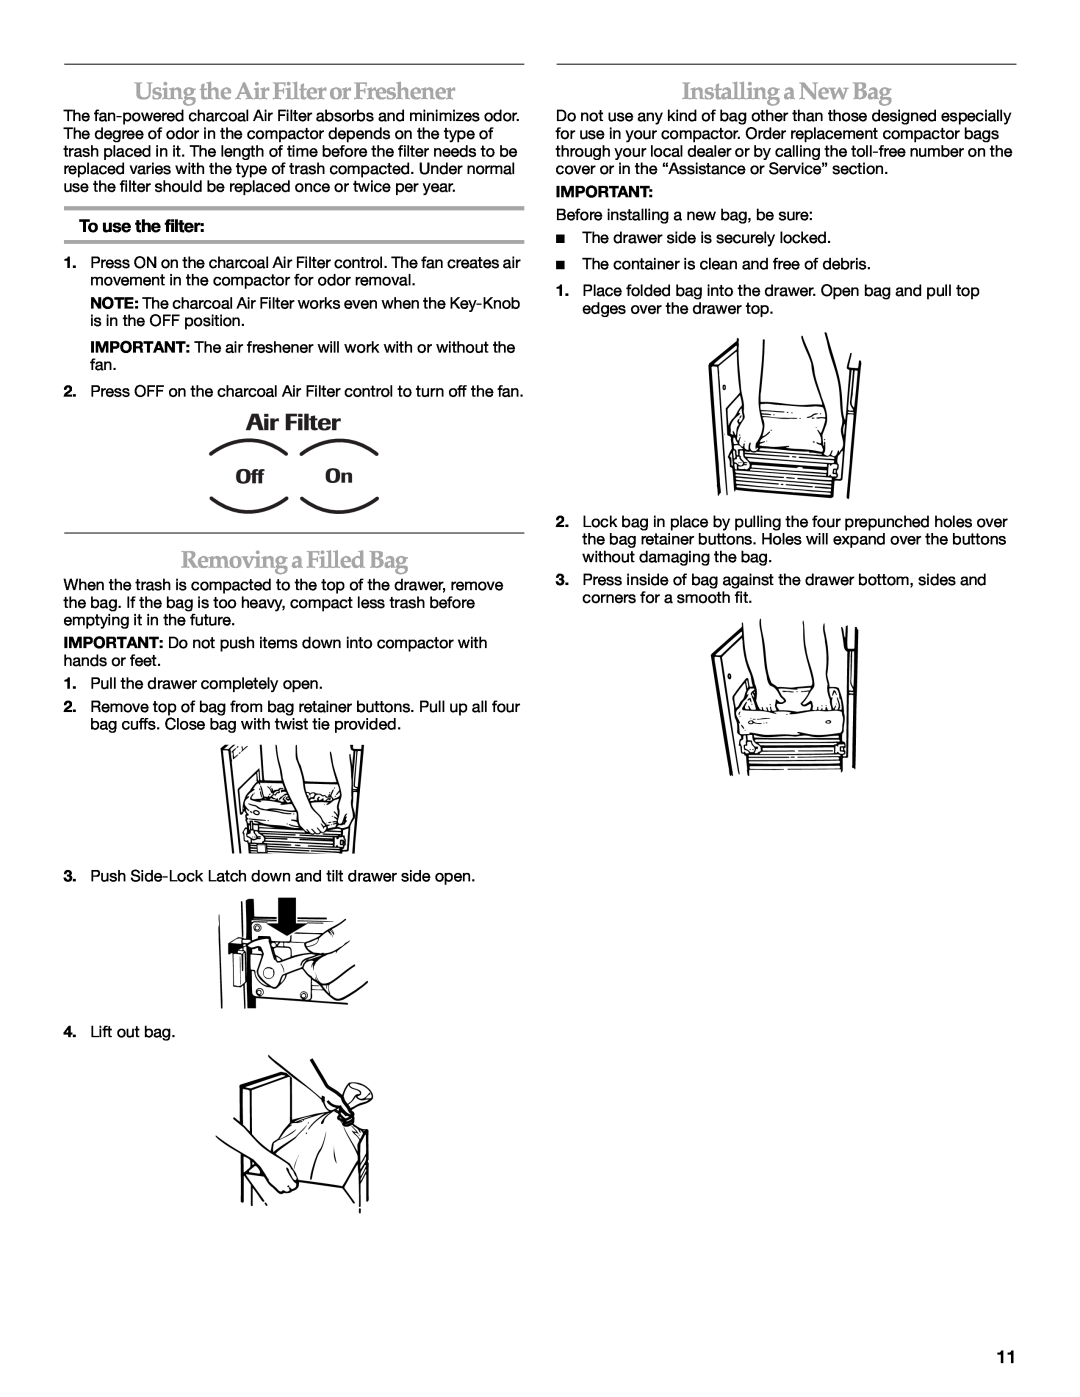 KitchenAid 9871780C manual Using the Air FilterorFreshener, Removing a Filled Bag, Installinga New Bag, To use the filter 